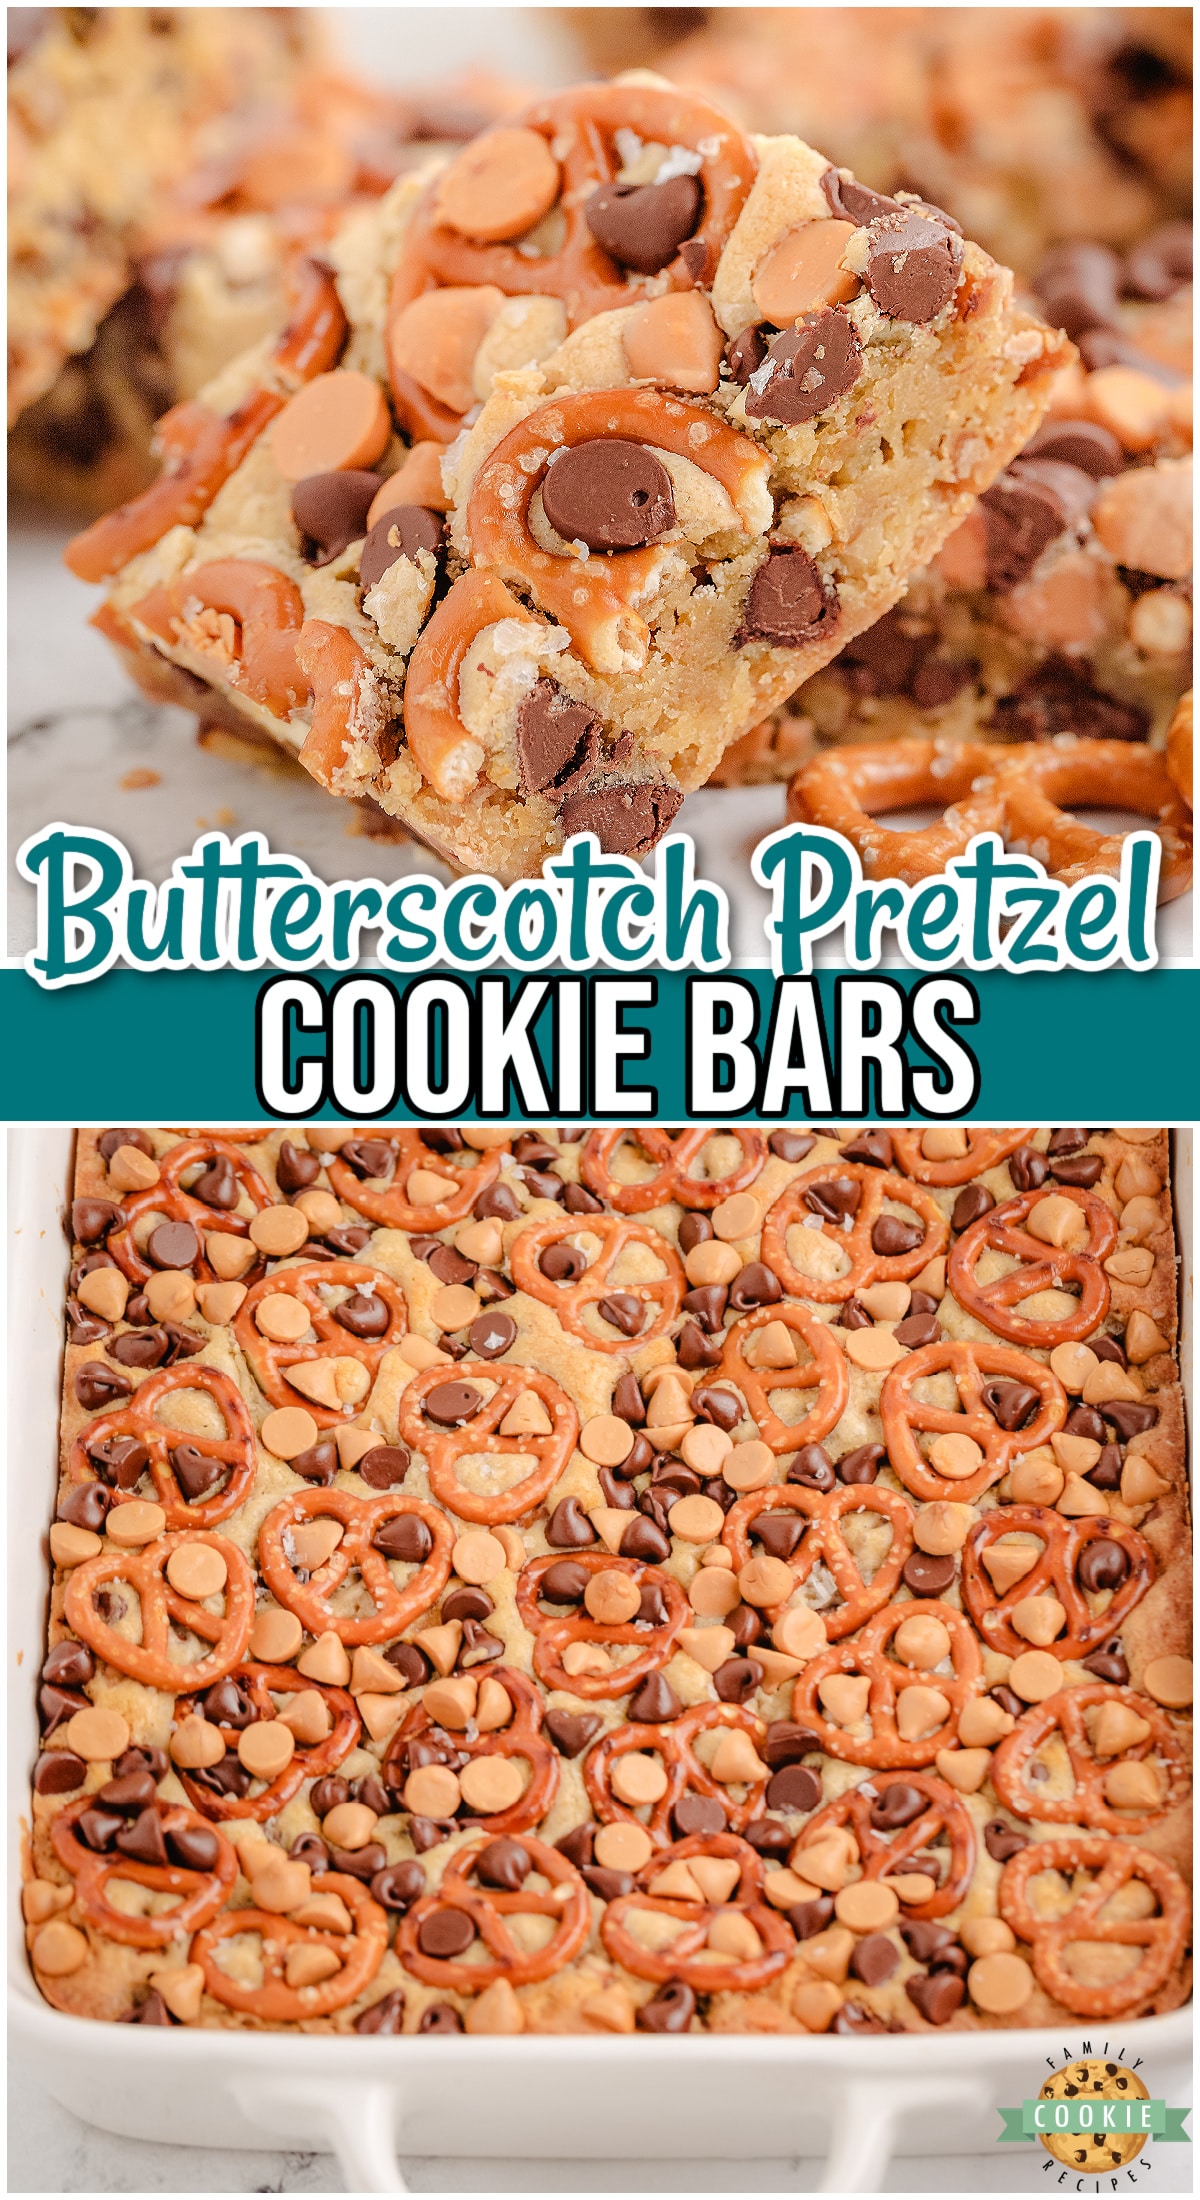 Butterscotch Pretzel Cookie Bars are sweet & salty cookie bars with great butterscotch flavor! Cookie bars loaded with pretzels, chocolate + butterscotch chips that everyone loves!